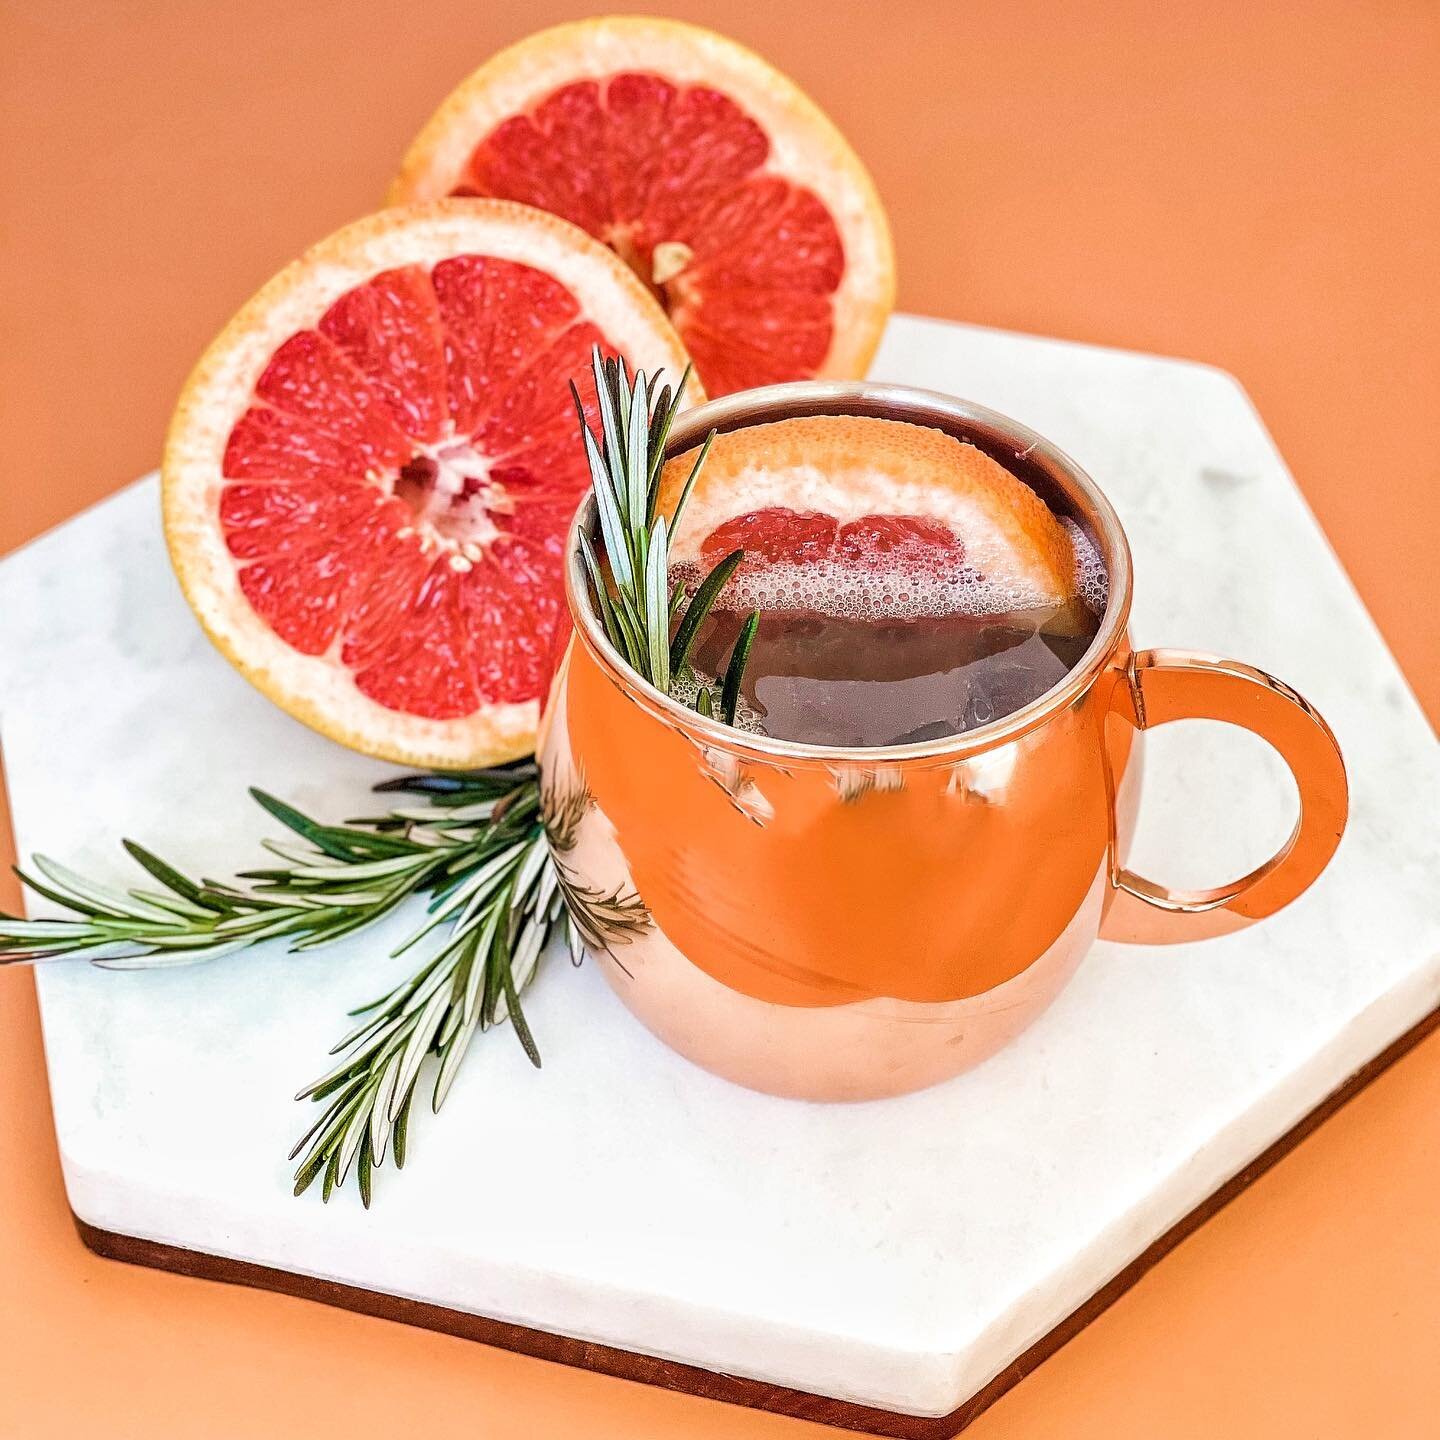 Who doesn&rsquo;t love a good Moscow Mule?⁣
⁣
Since it&rsquo;s Moscow Mule Day, I put a little twist on it using ingredients already in my fridge - rosemary and grapefruit, which makes this already refreshing cocktail even more so. ⁣
⁣
Link in my bio